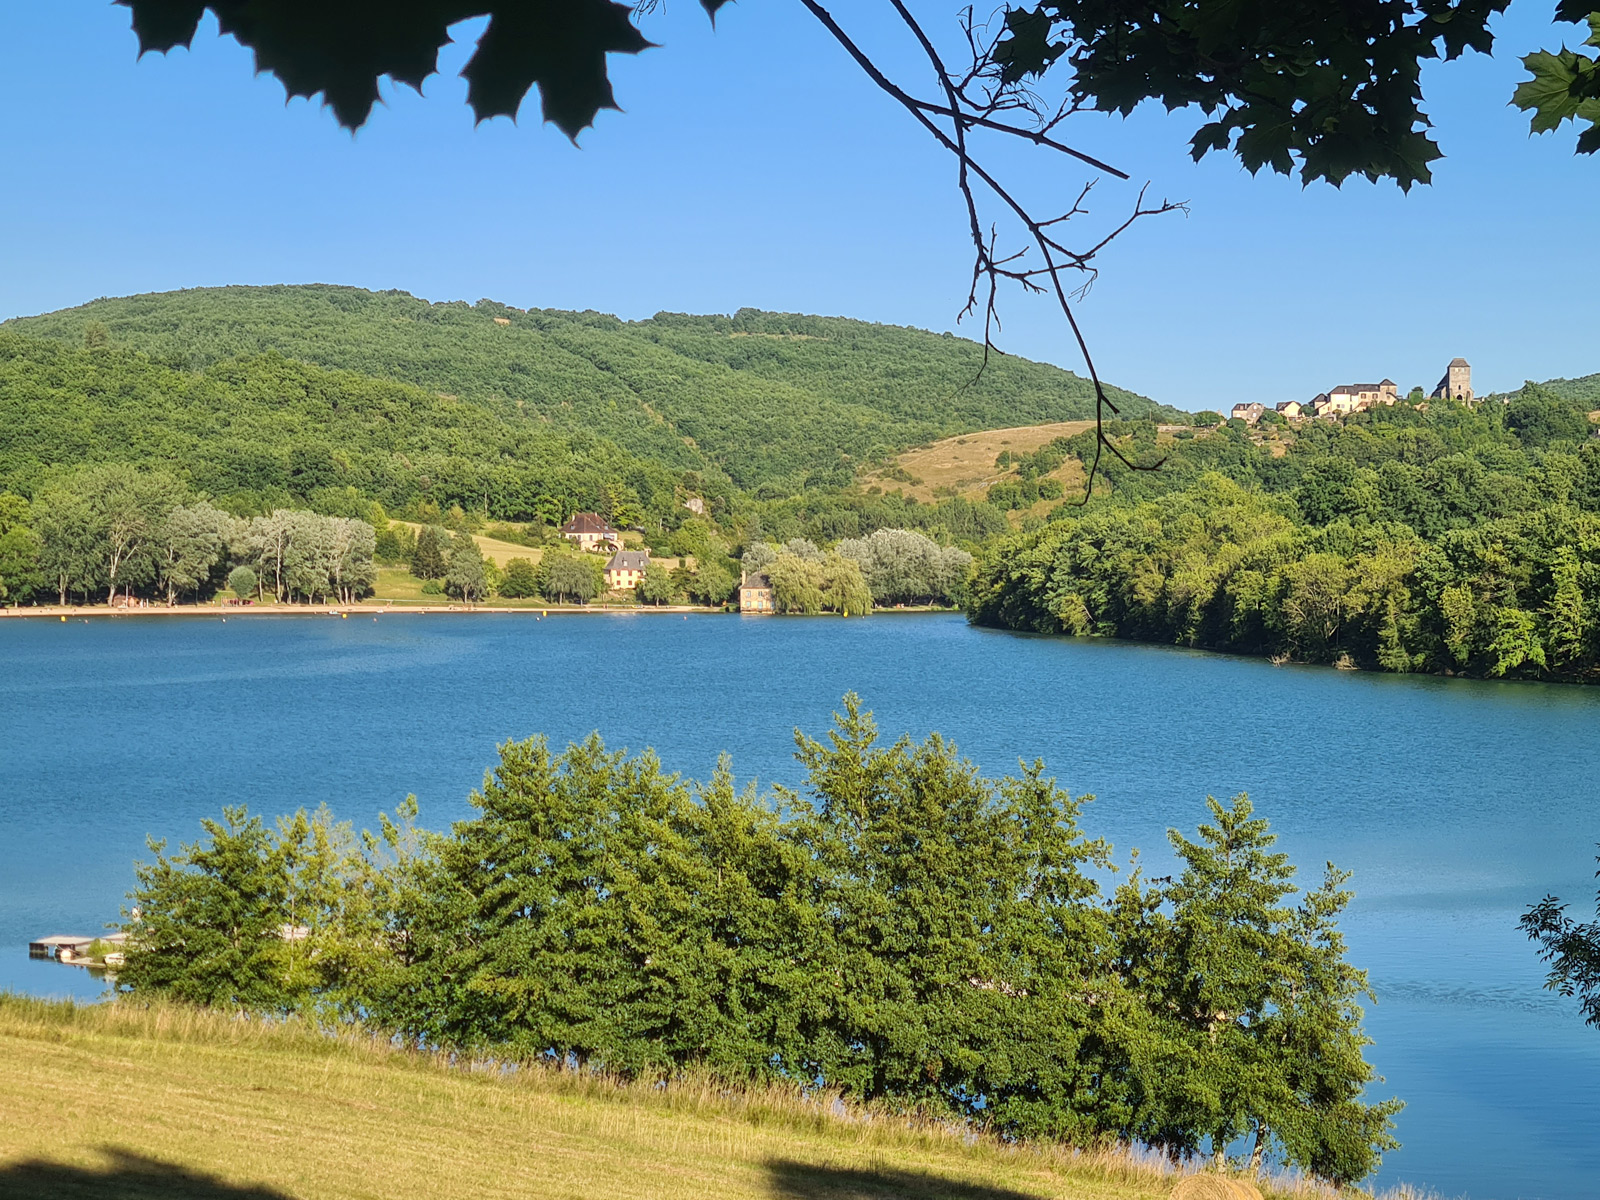 The Lac du Causse, THE place to know near Brive